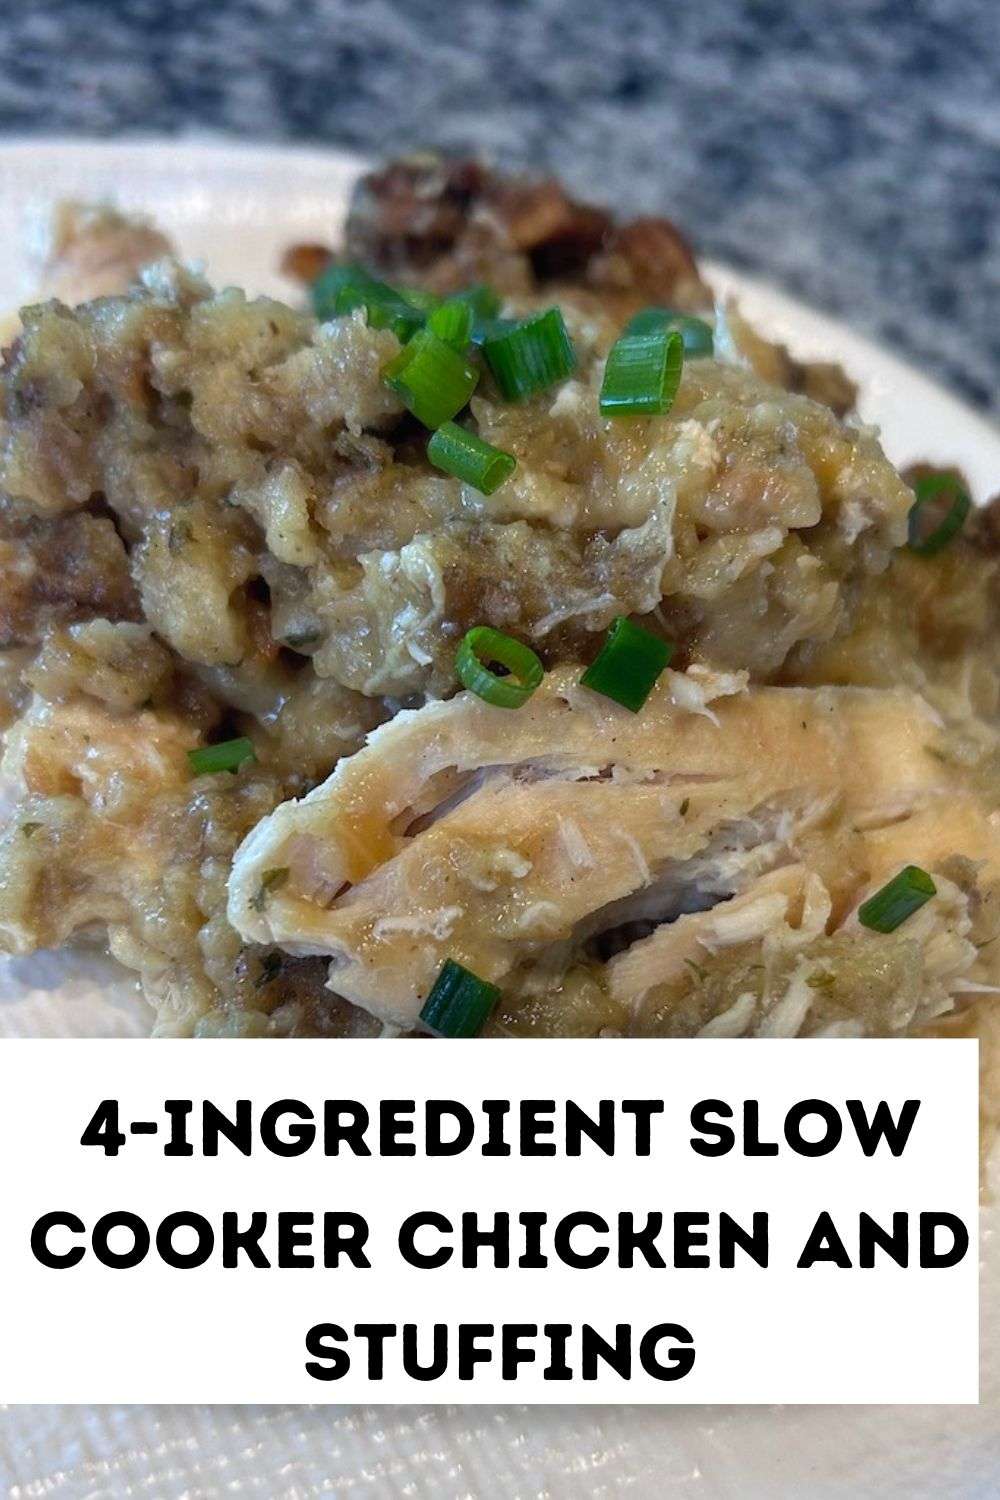 4-Ingredient Slow Cooker Chicken And Stuffing